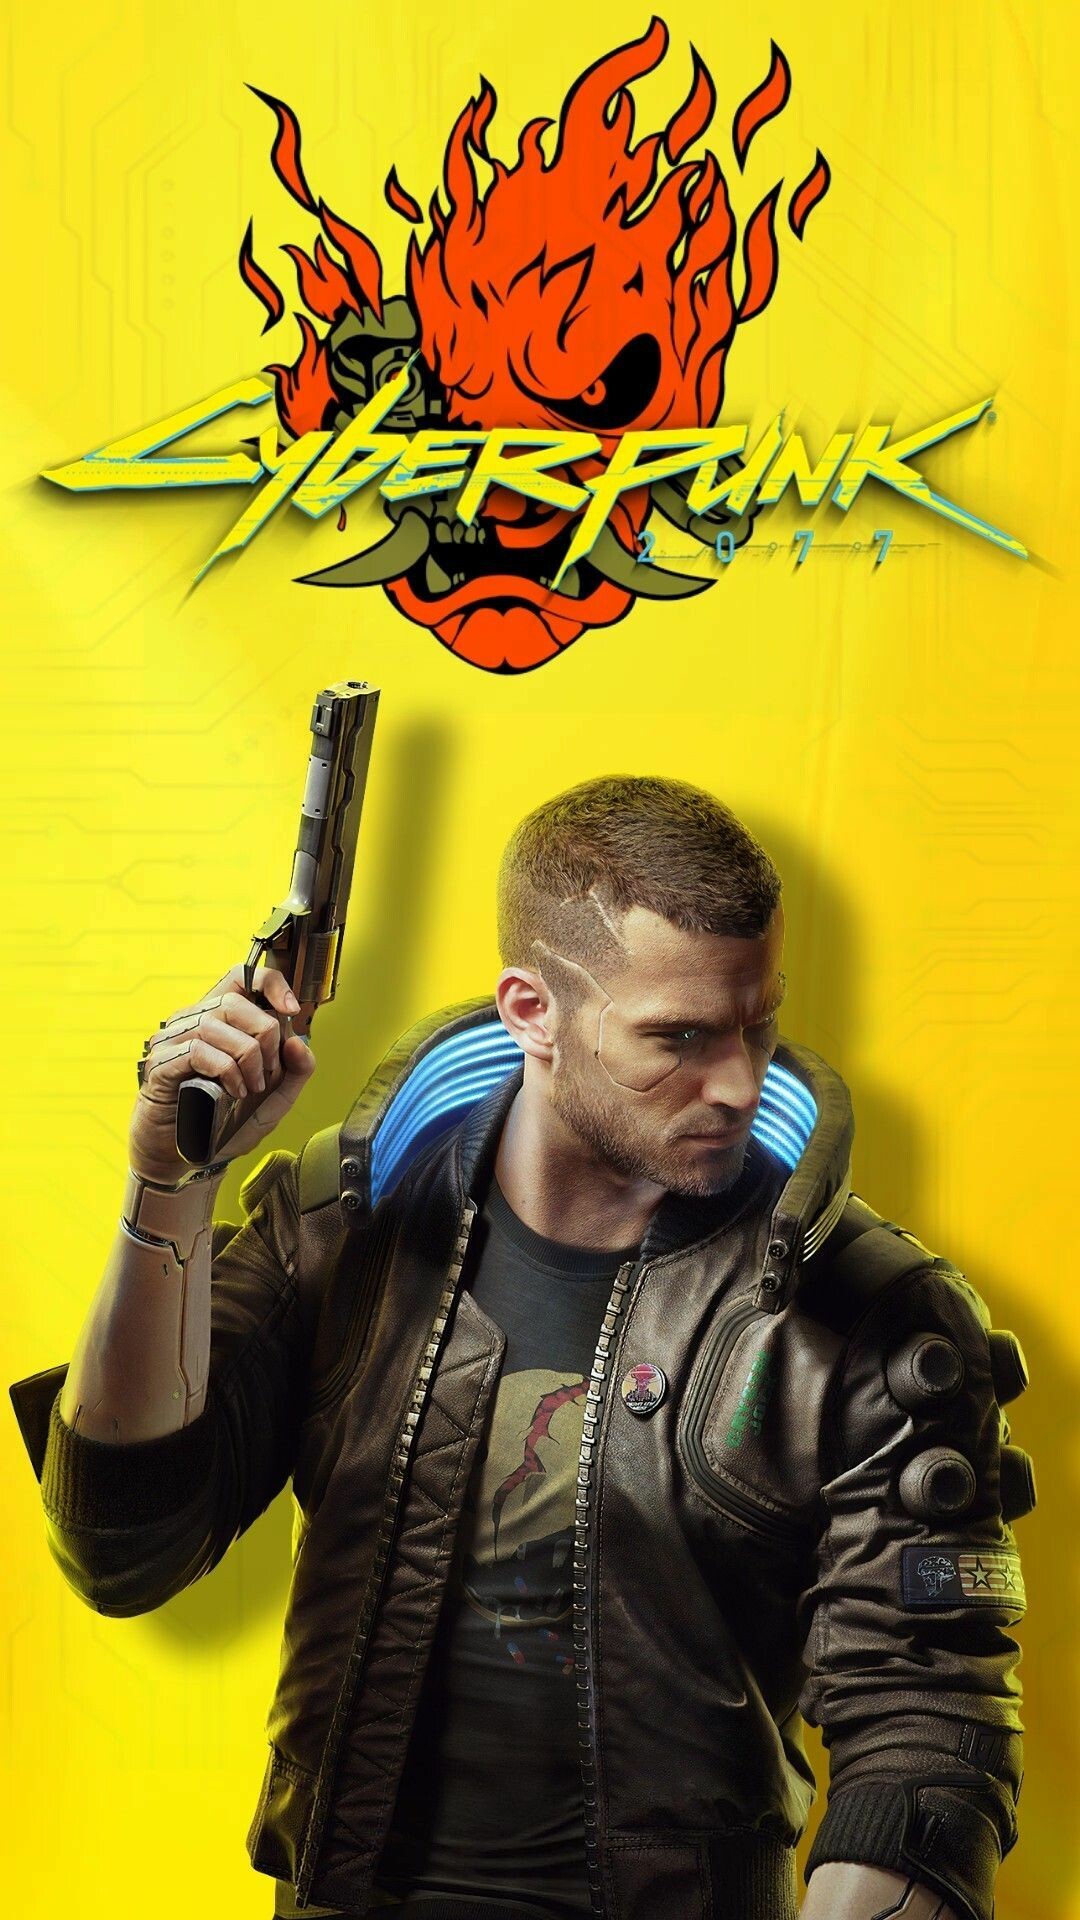 Cyberpunk 2077: An action role-playing video game developed by CD Projekt Red and published by CD Projekt. 1080x1920 Full HD Background.